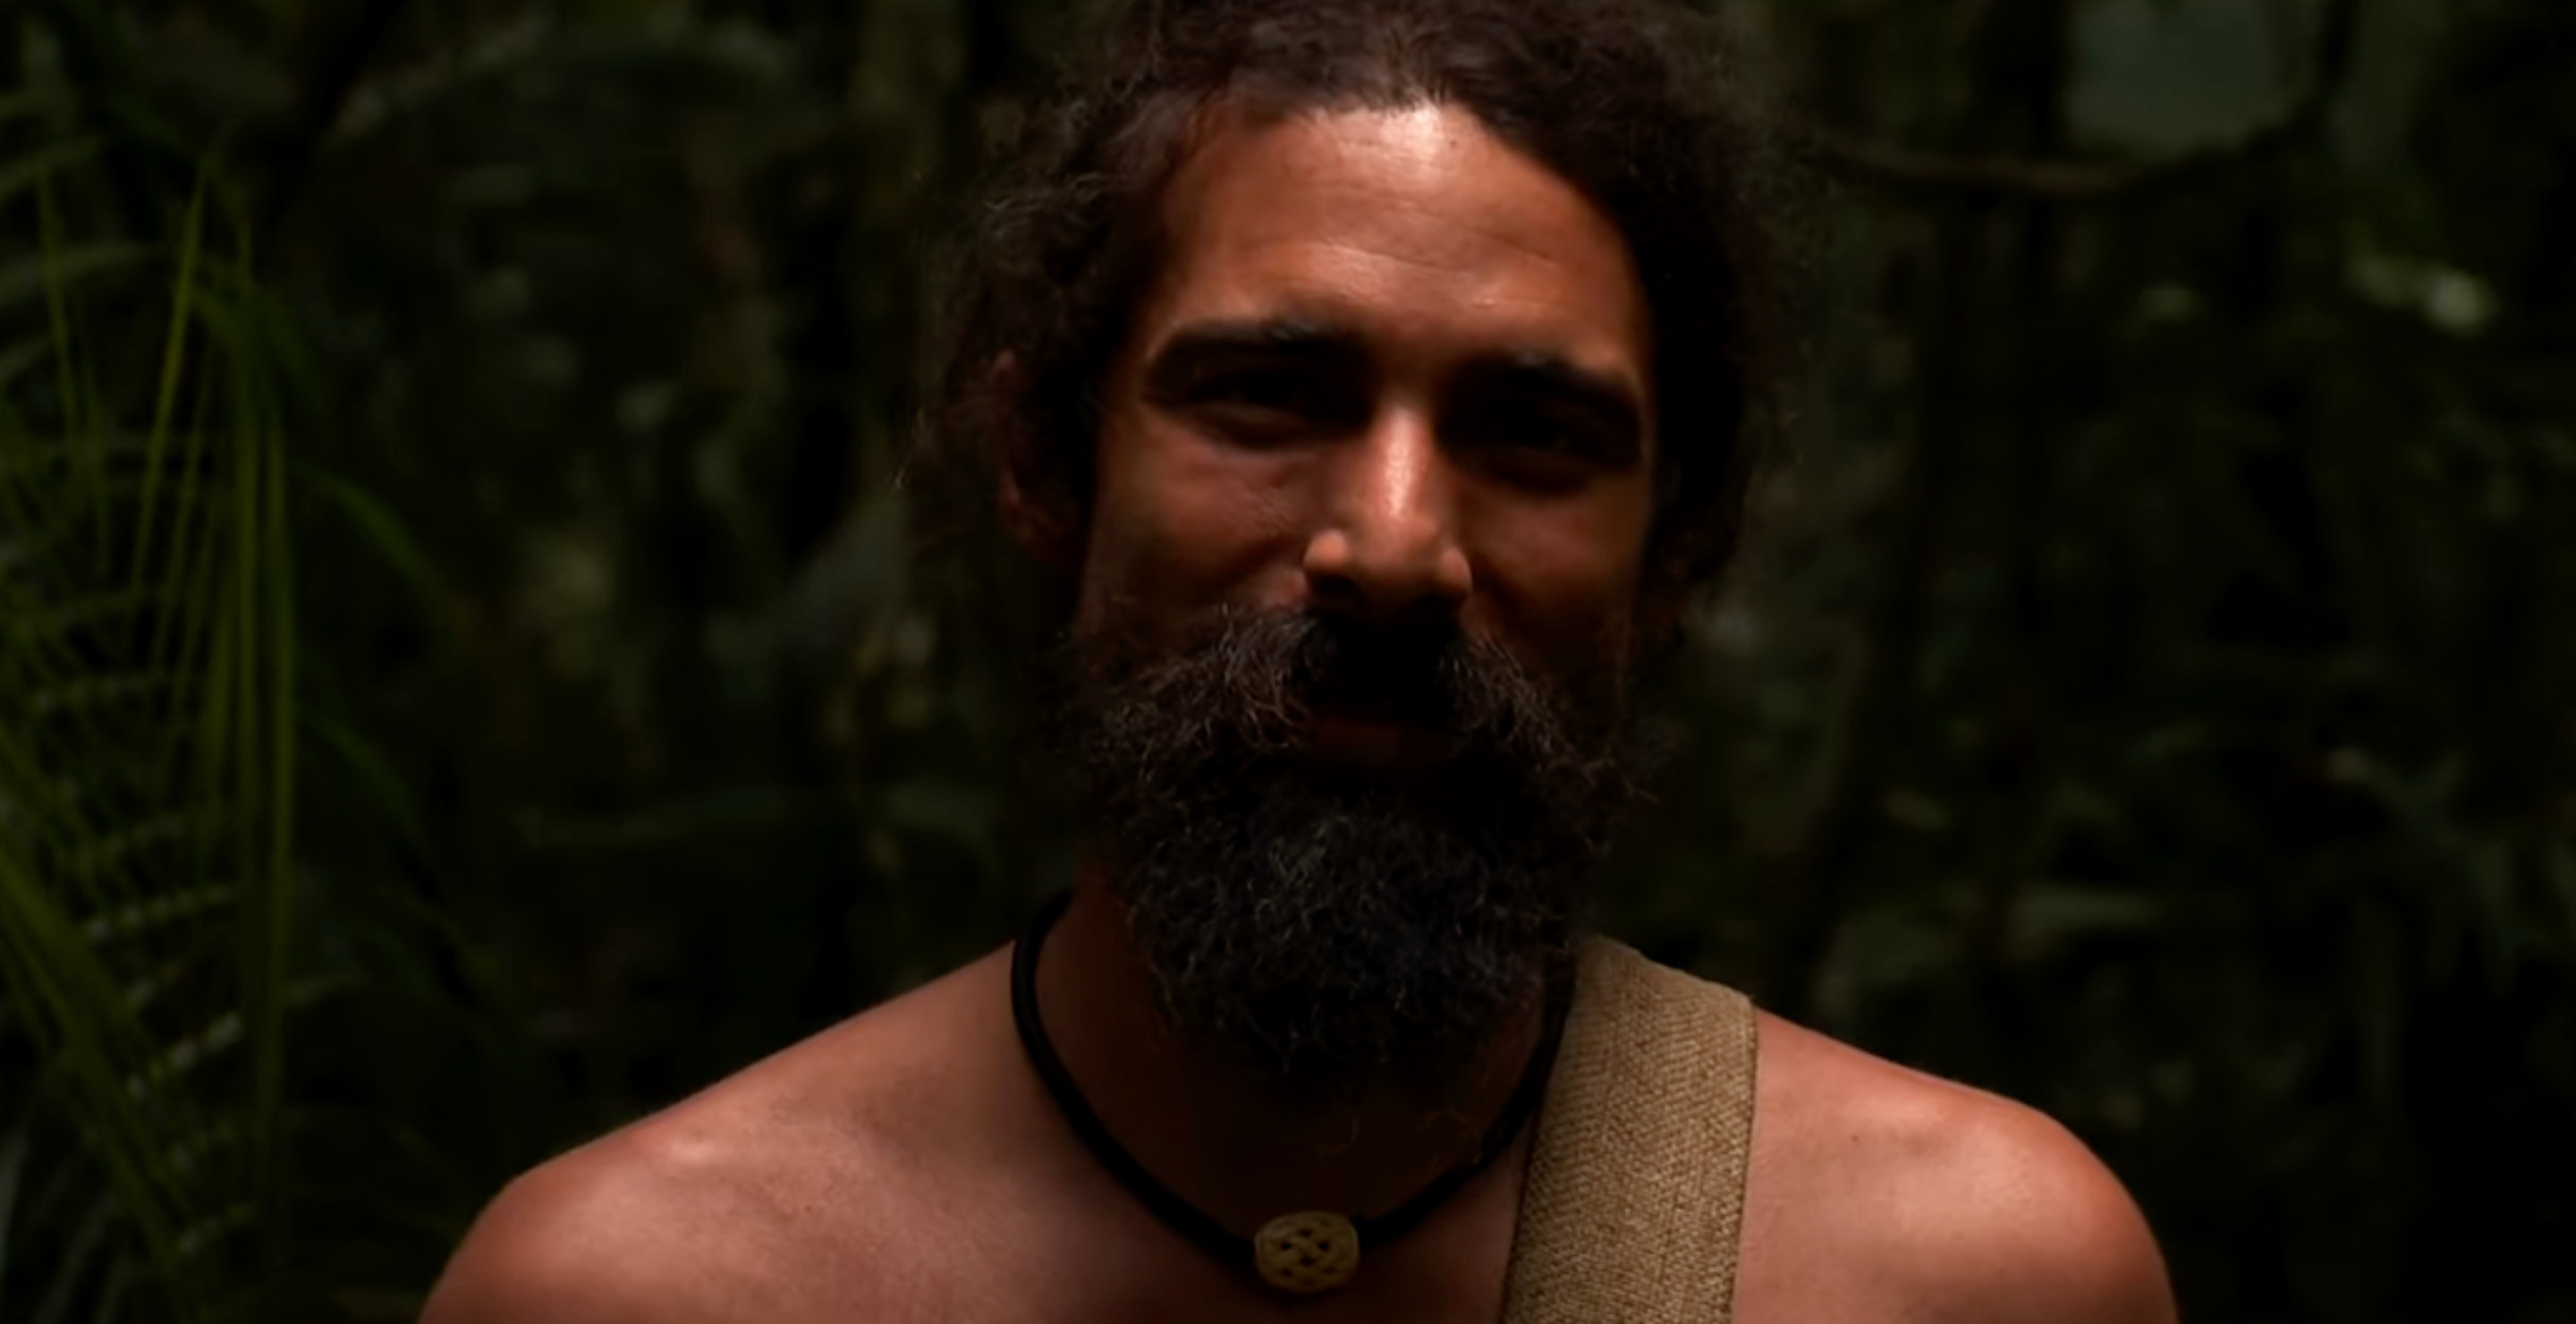 'Naked & Afraid XL' Survivalist Opens Up About Having Autism In Emotional Moment